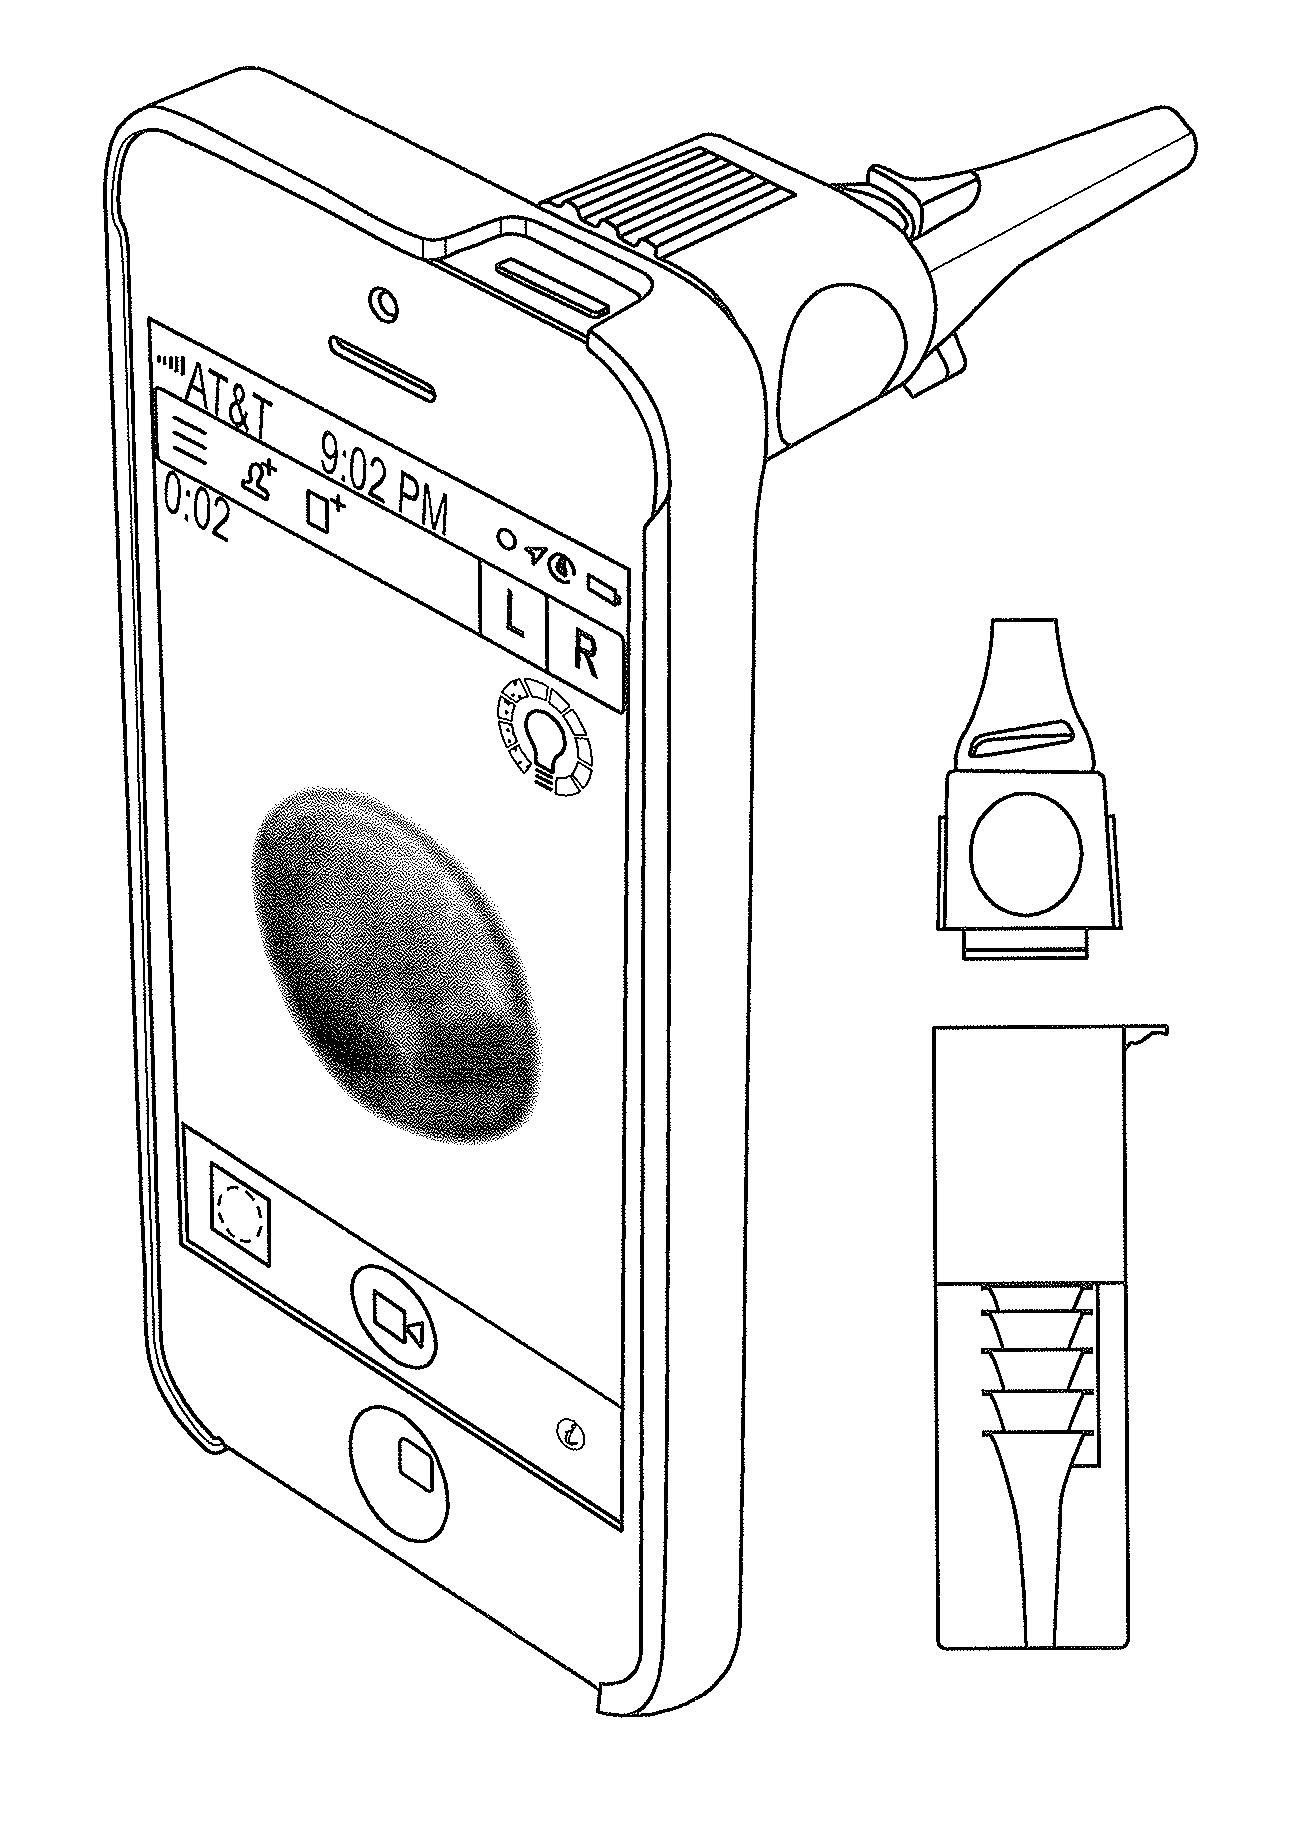 Apparatuses and methods for mobile imaging and analysis